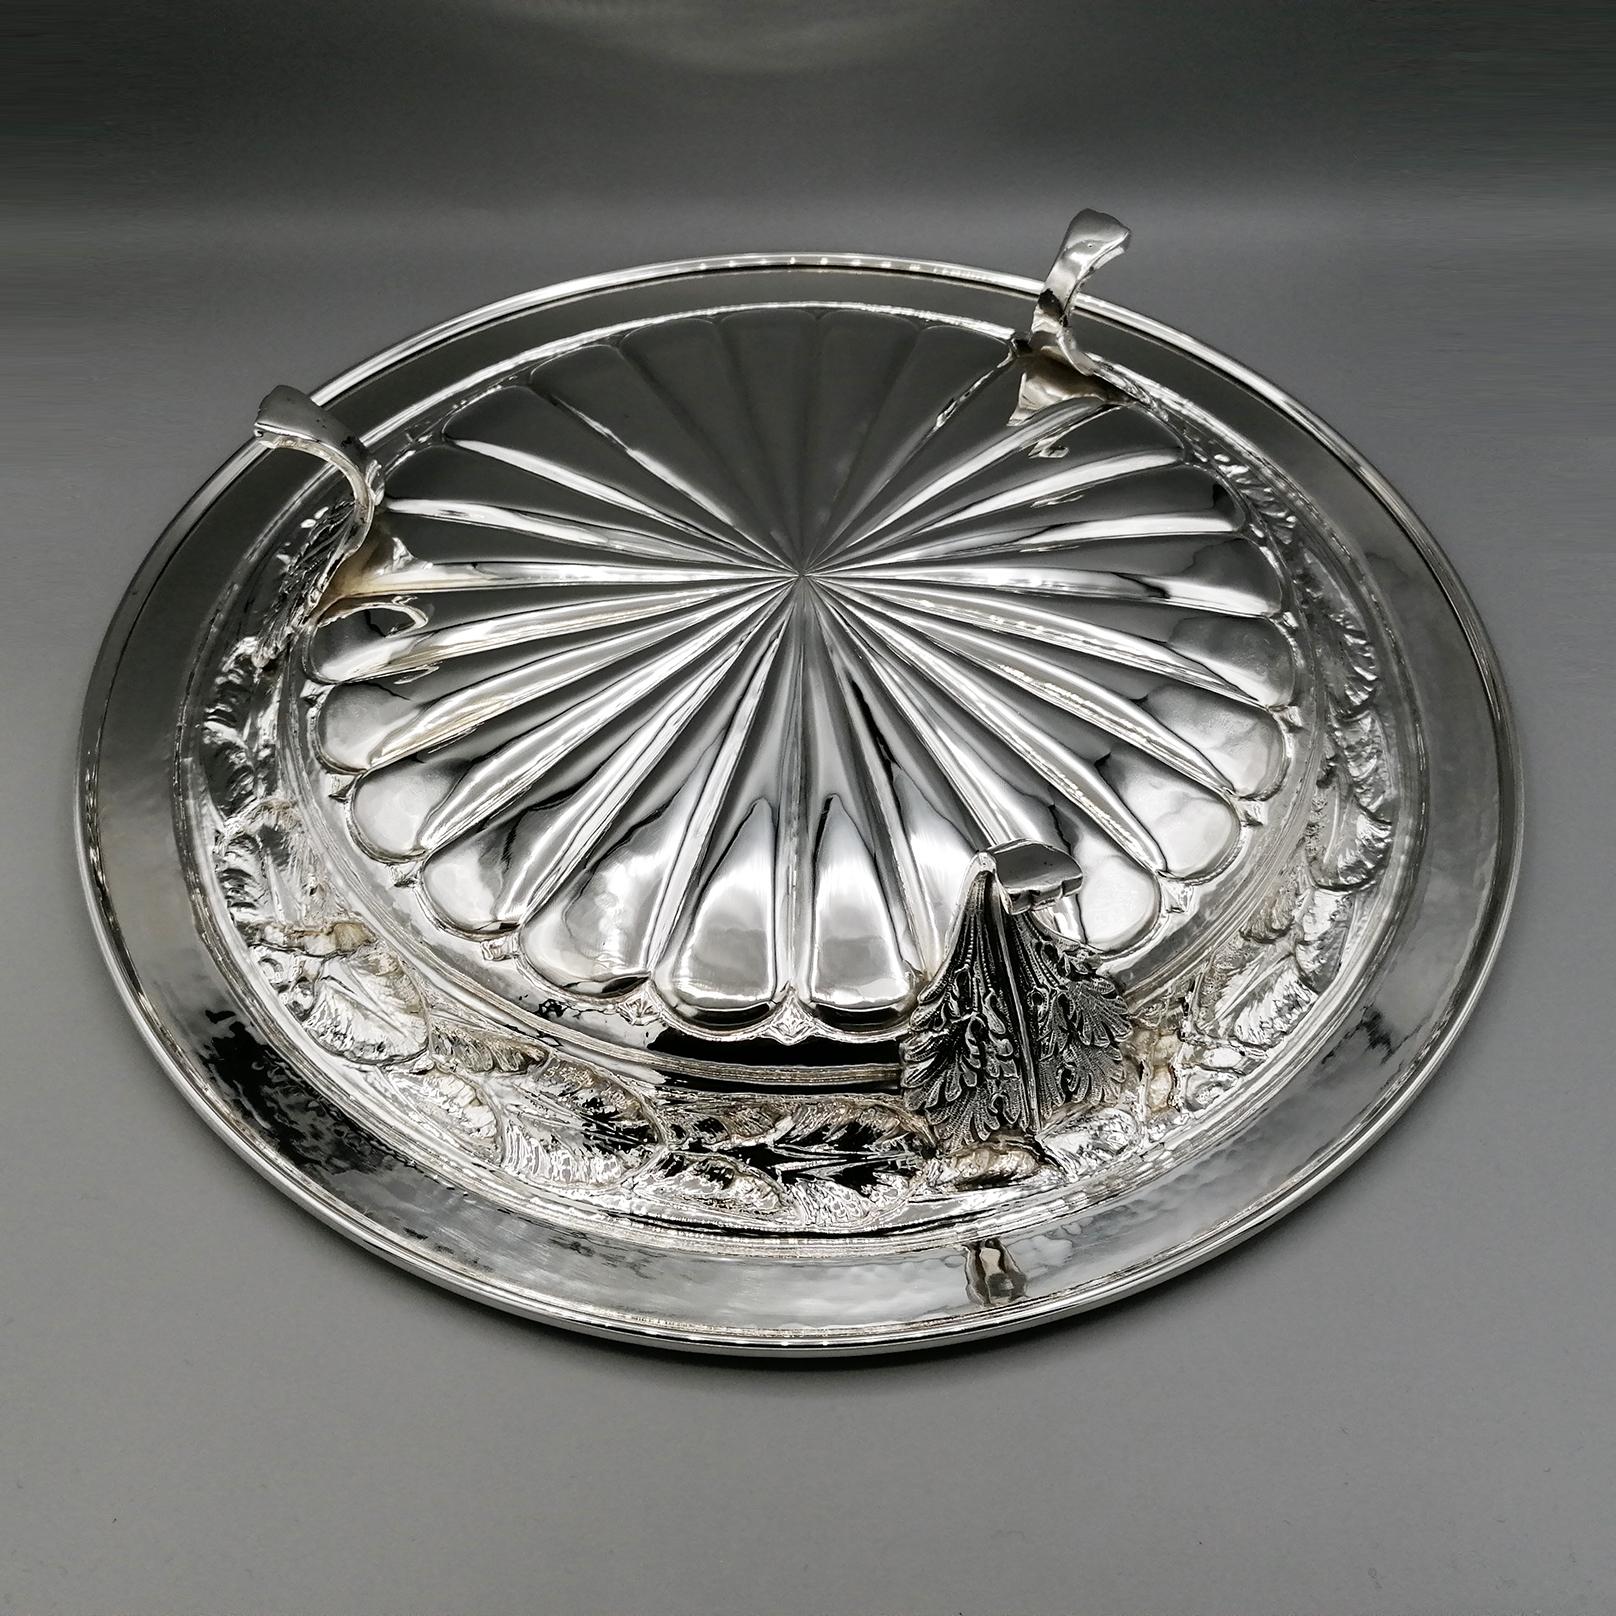 21th Century Italian Sterling Silver Empire Style Centerpiece Dish on Feet  For Sale 10